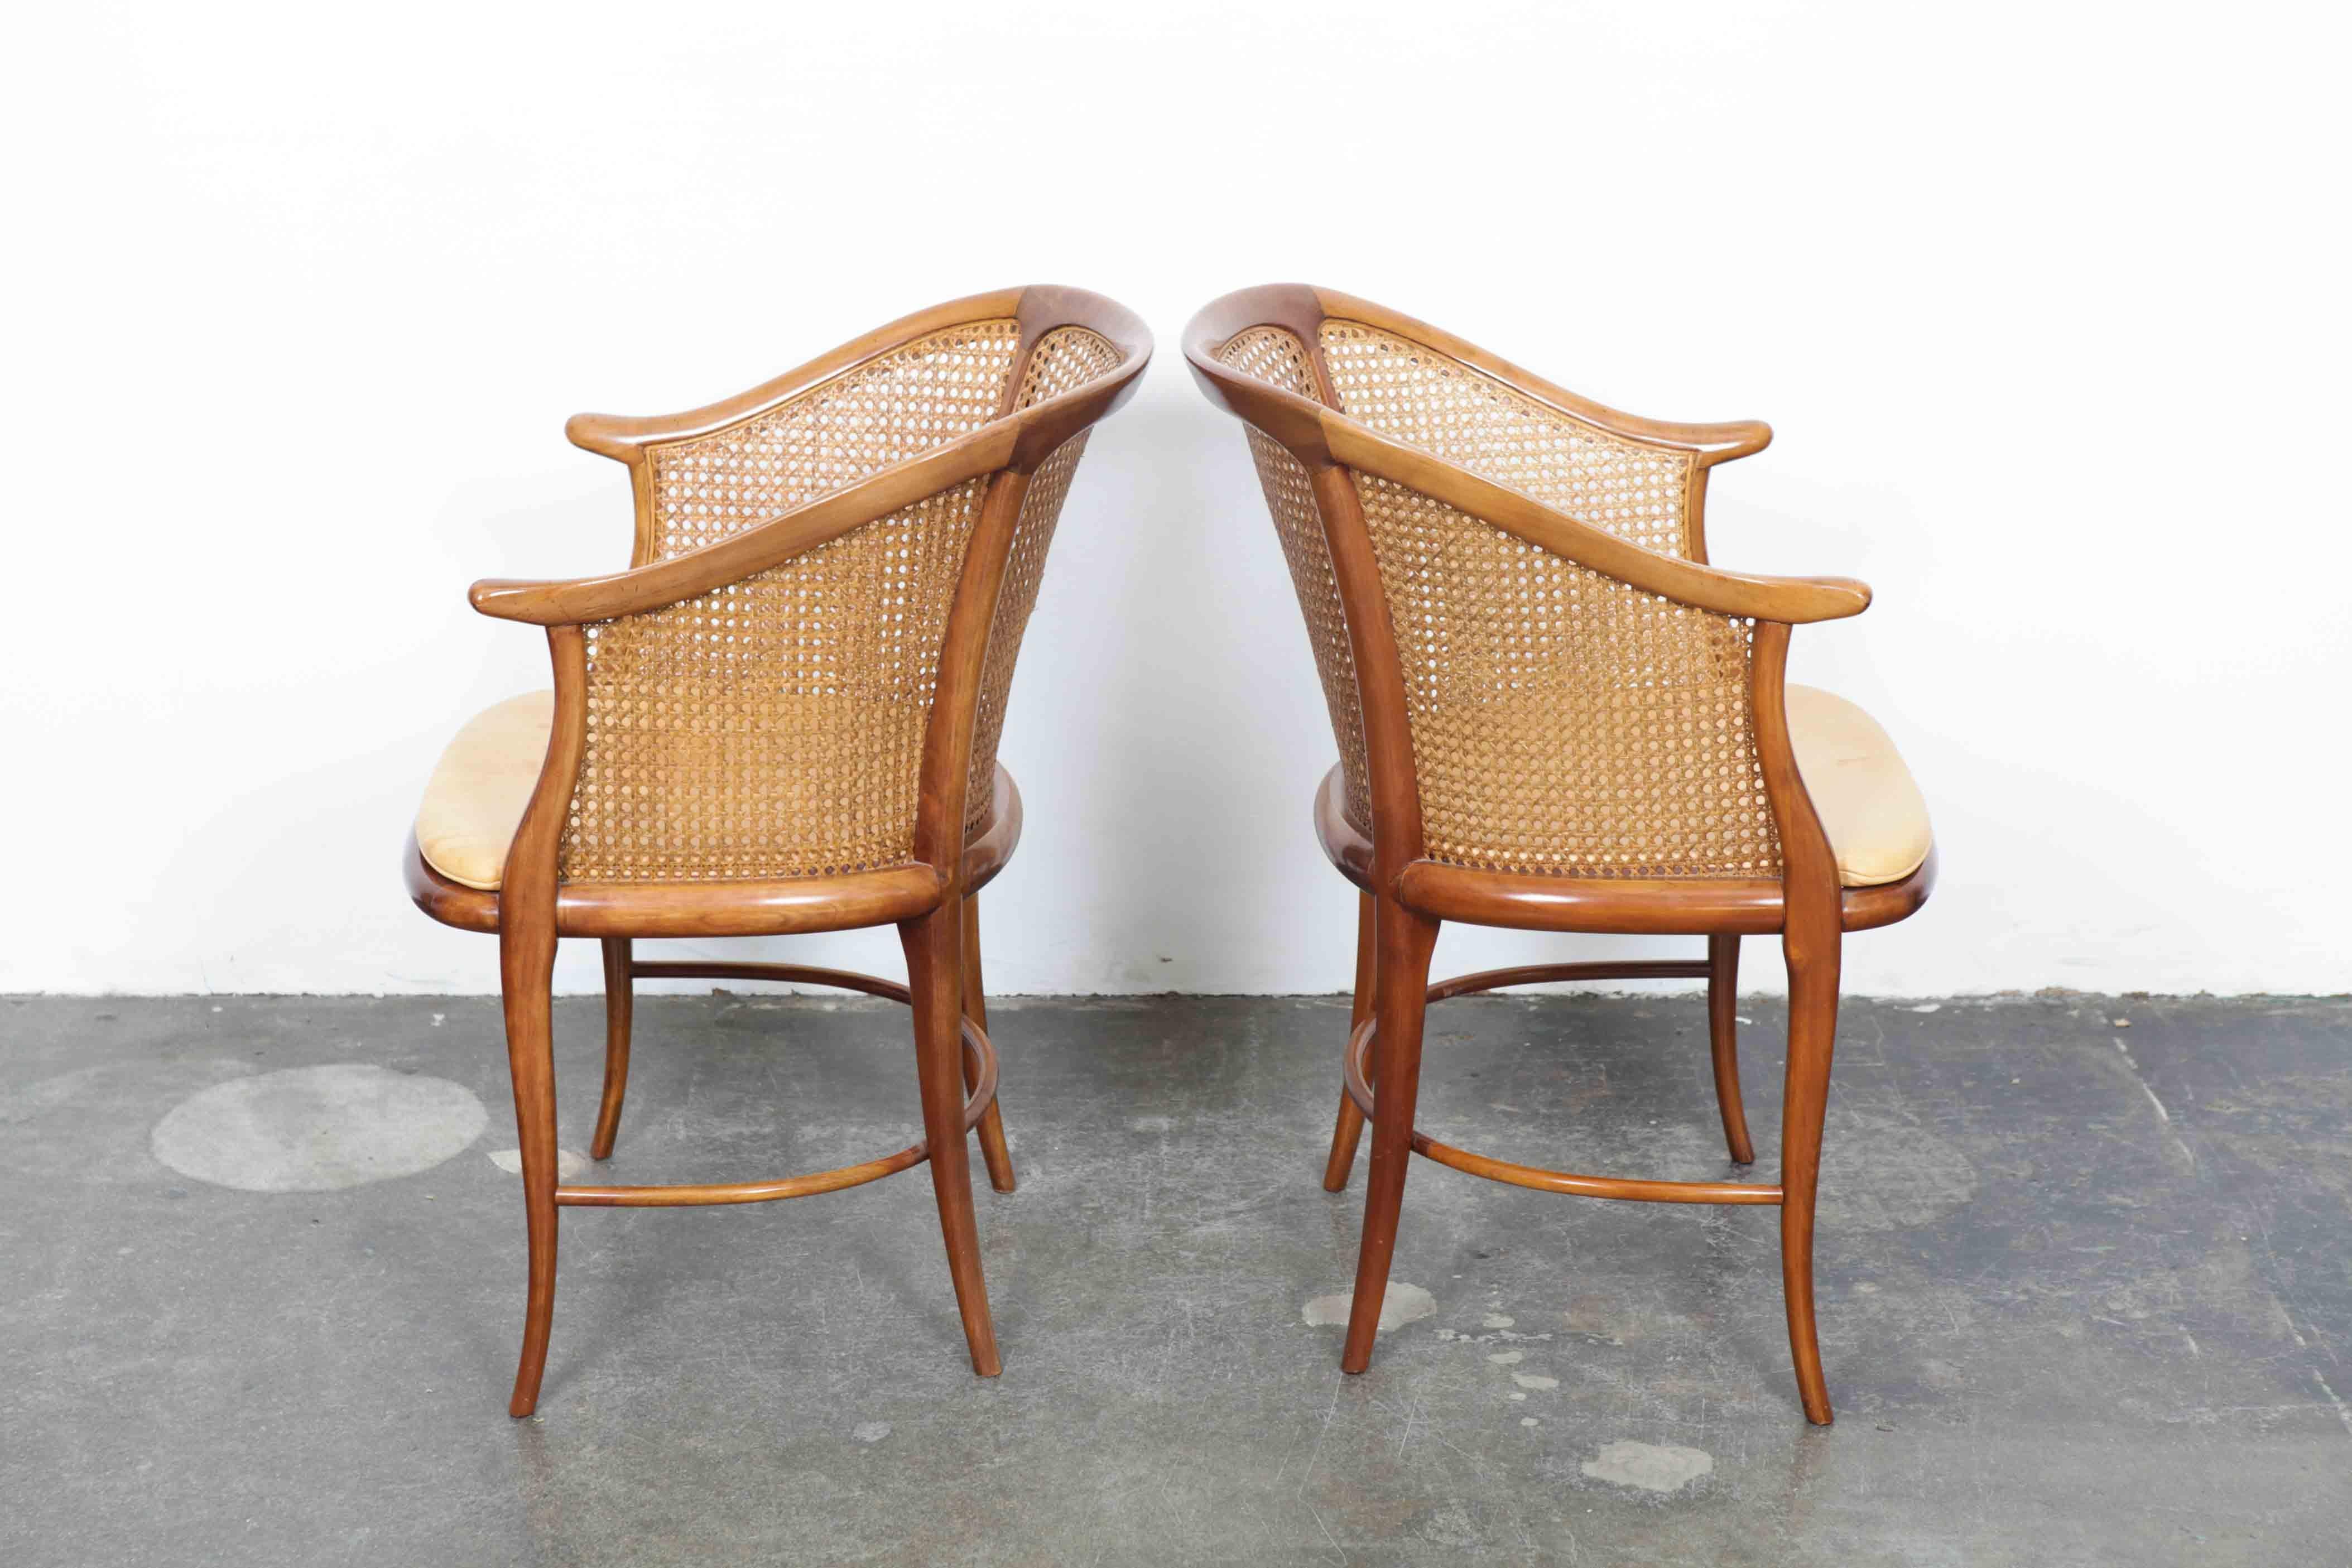 Pair of Cane and Leather Italian Chairs with Cherrywood Frames (Lackiert)